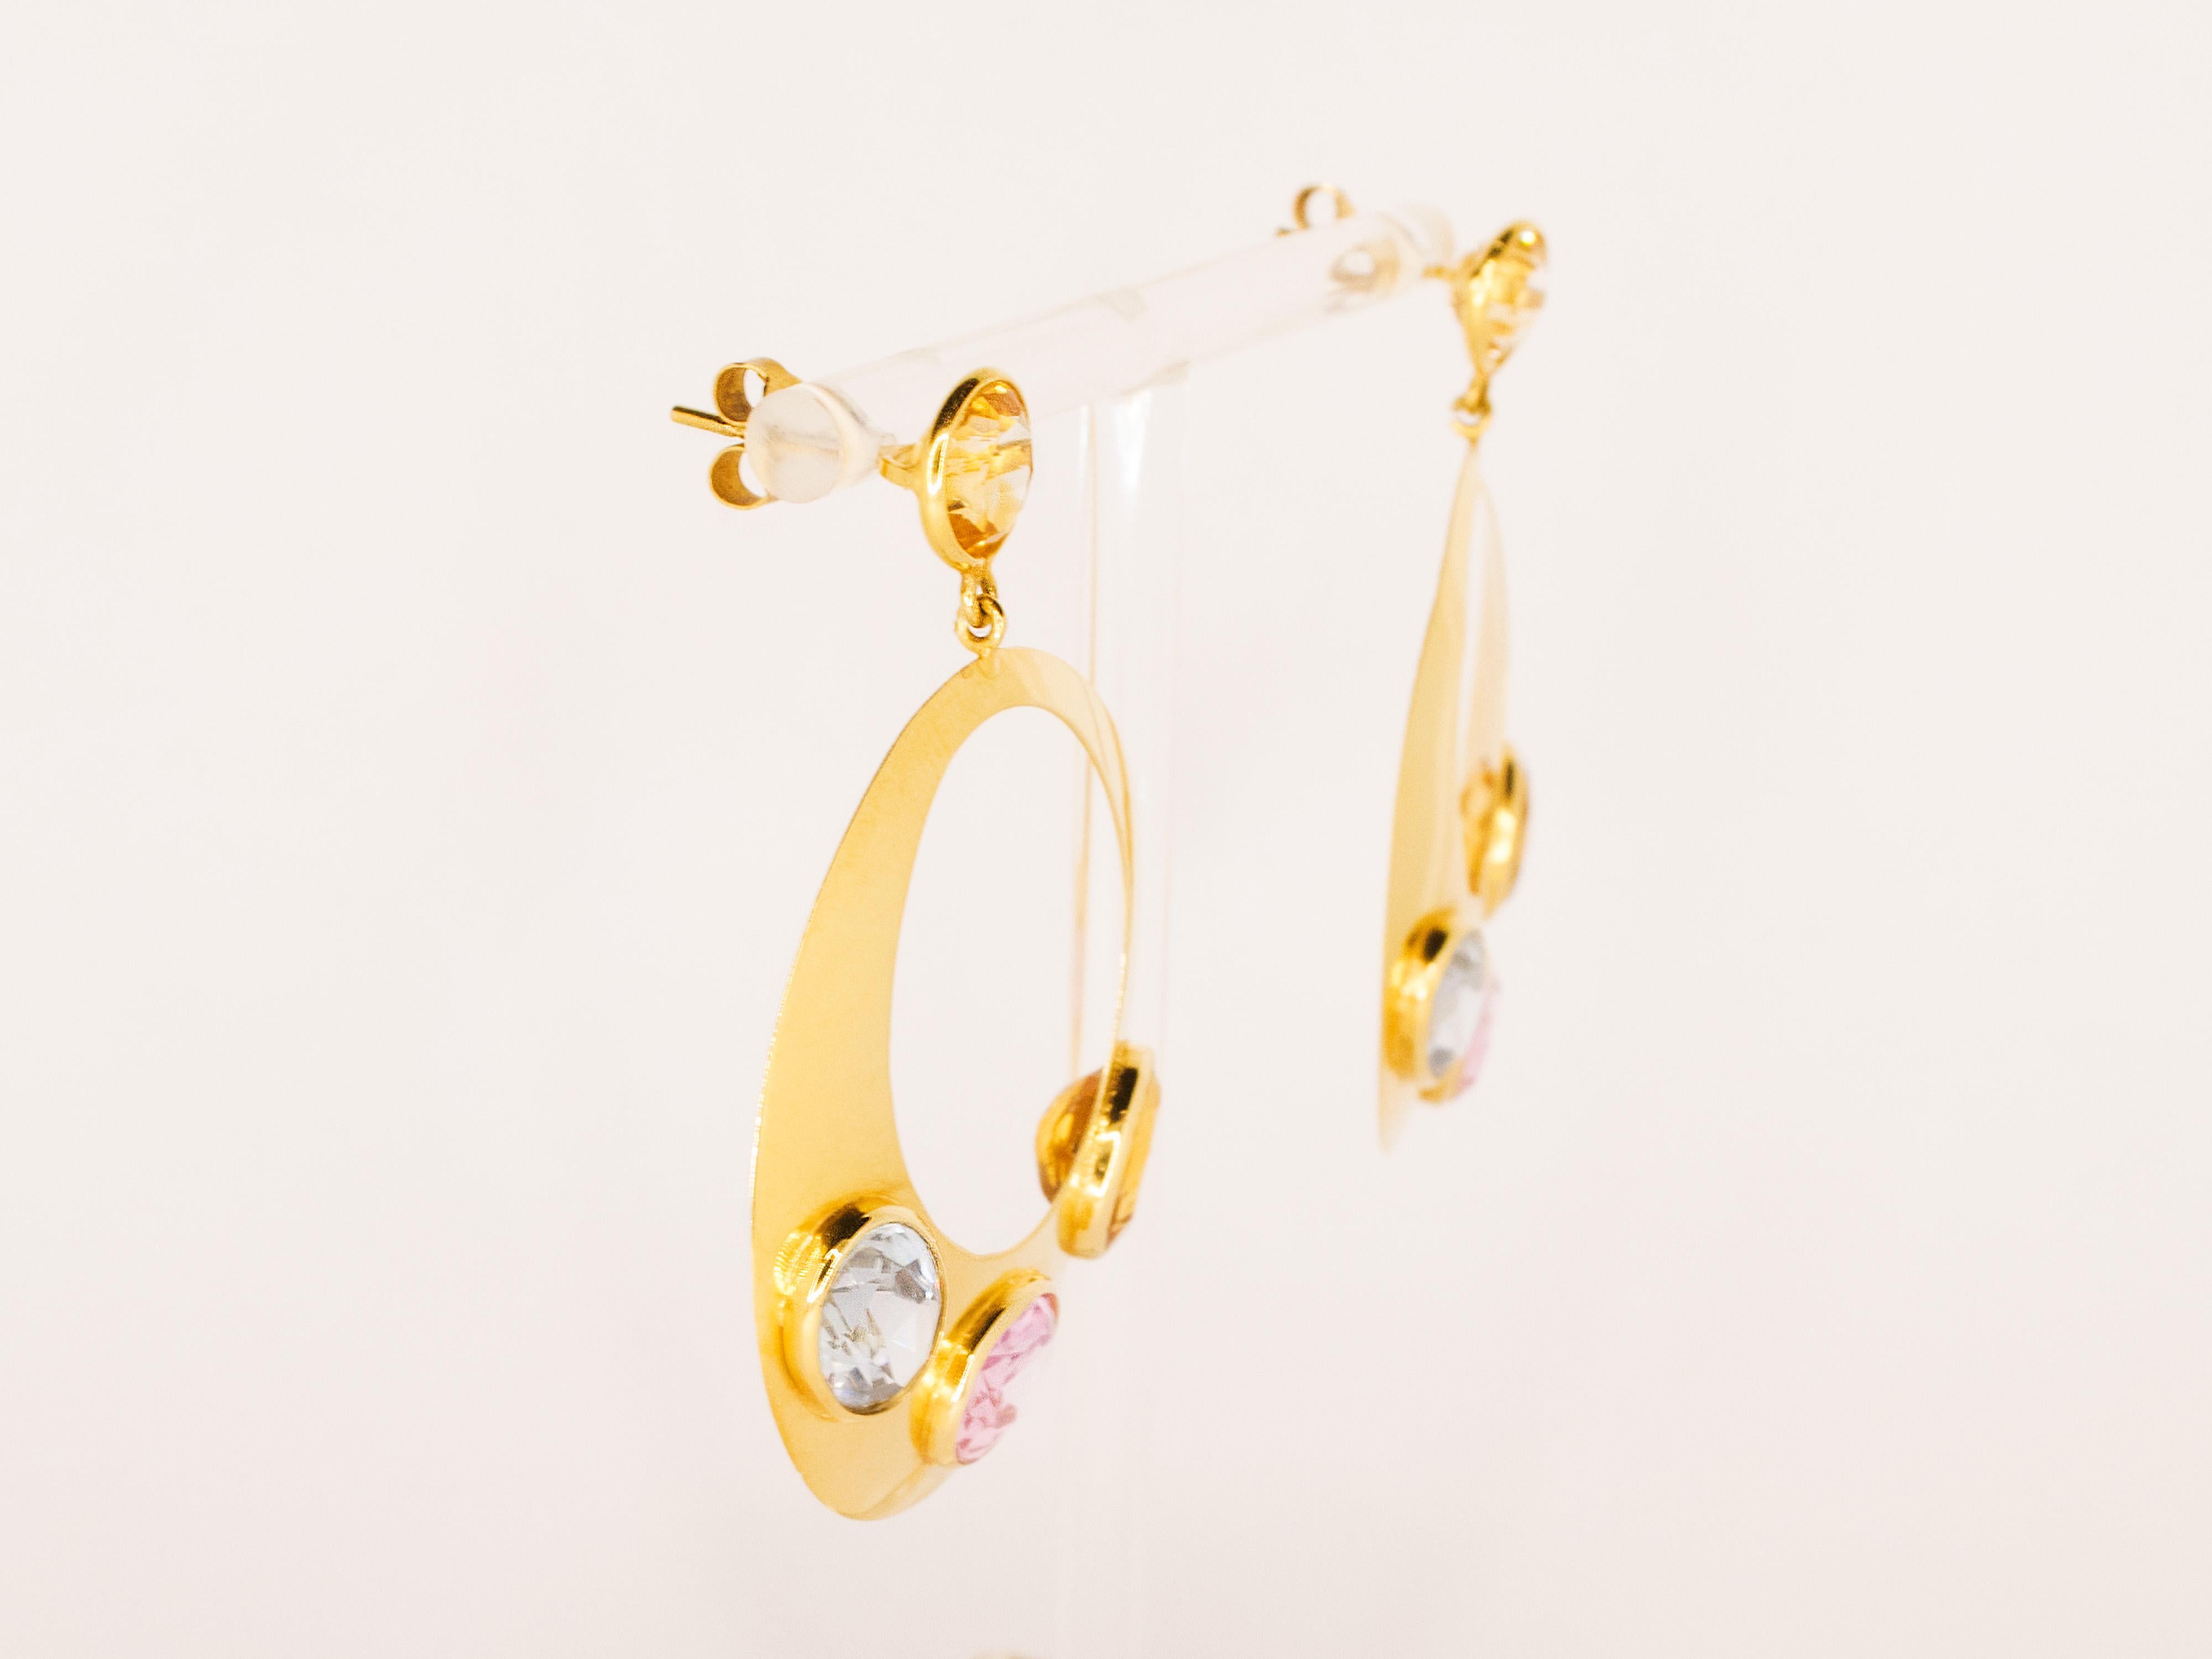 A pair of 18 kt yellow gold earrings weighing 14.80 g and embellished with  blue, pink and yellow quartz of oval and round cut.
These earrings have a 1990s style and design and at the same time are very current and wearable for any occasion.
Gold